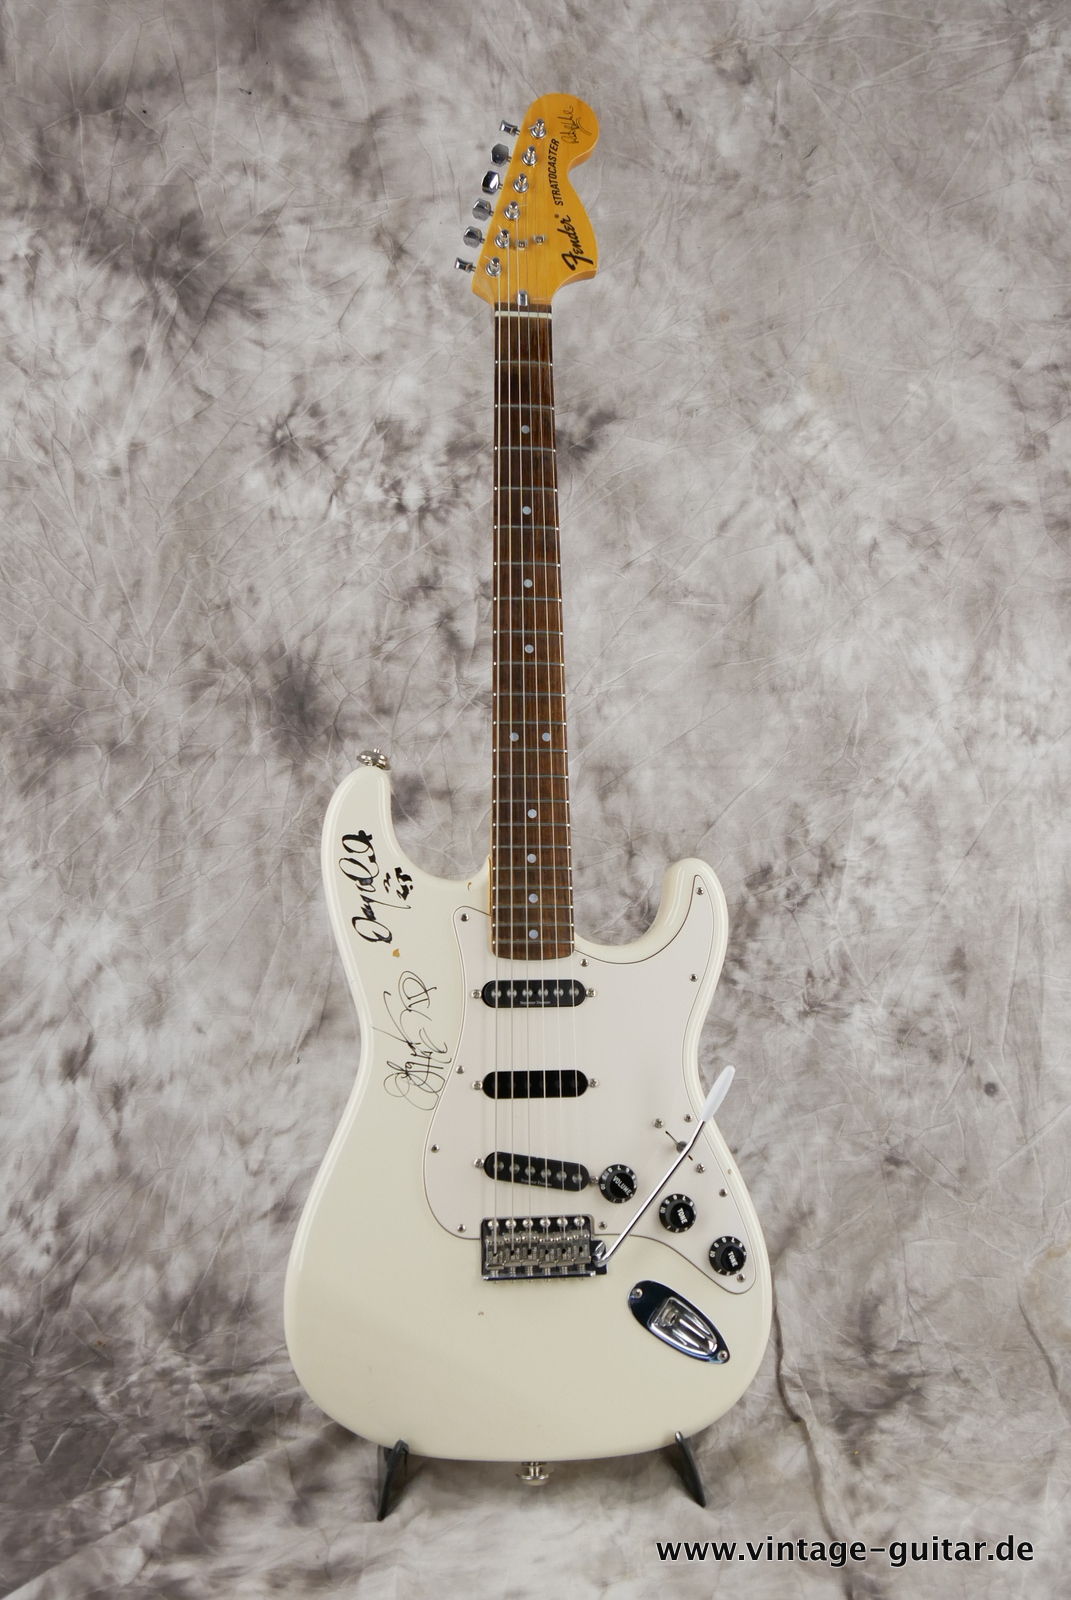 Fender_Strat_Stratocaster_Ritchie_Blackmore_ST-72RB_madeinjapan_1997_olympic_white_singed_scalloped_fretboard-001.JPG